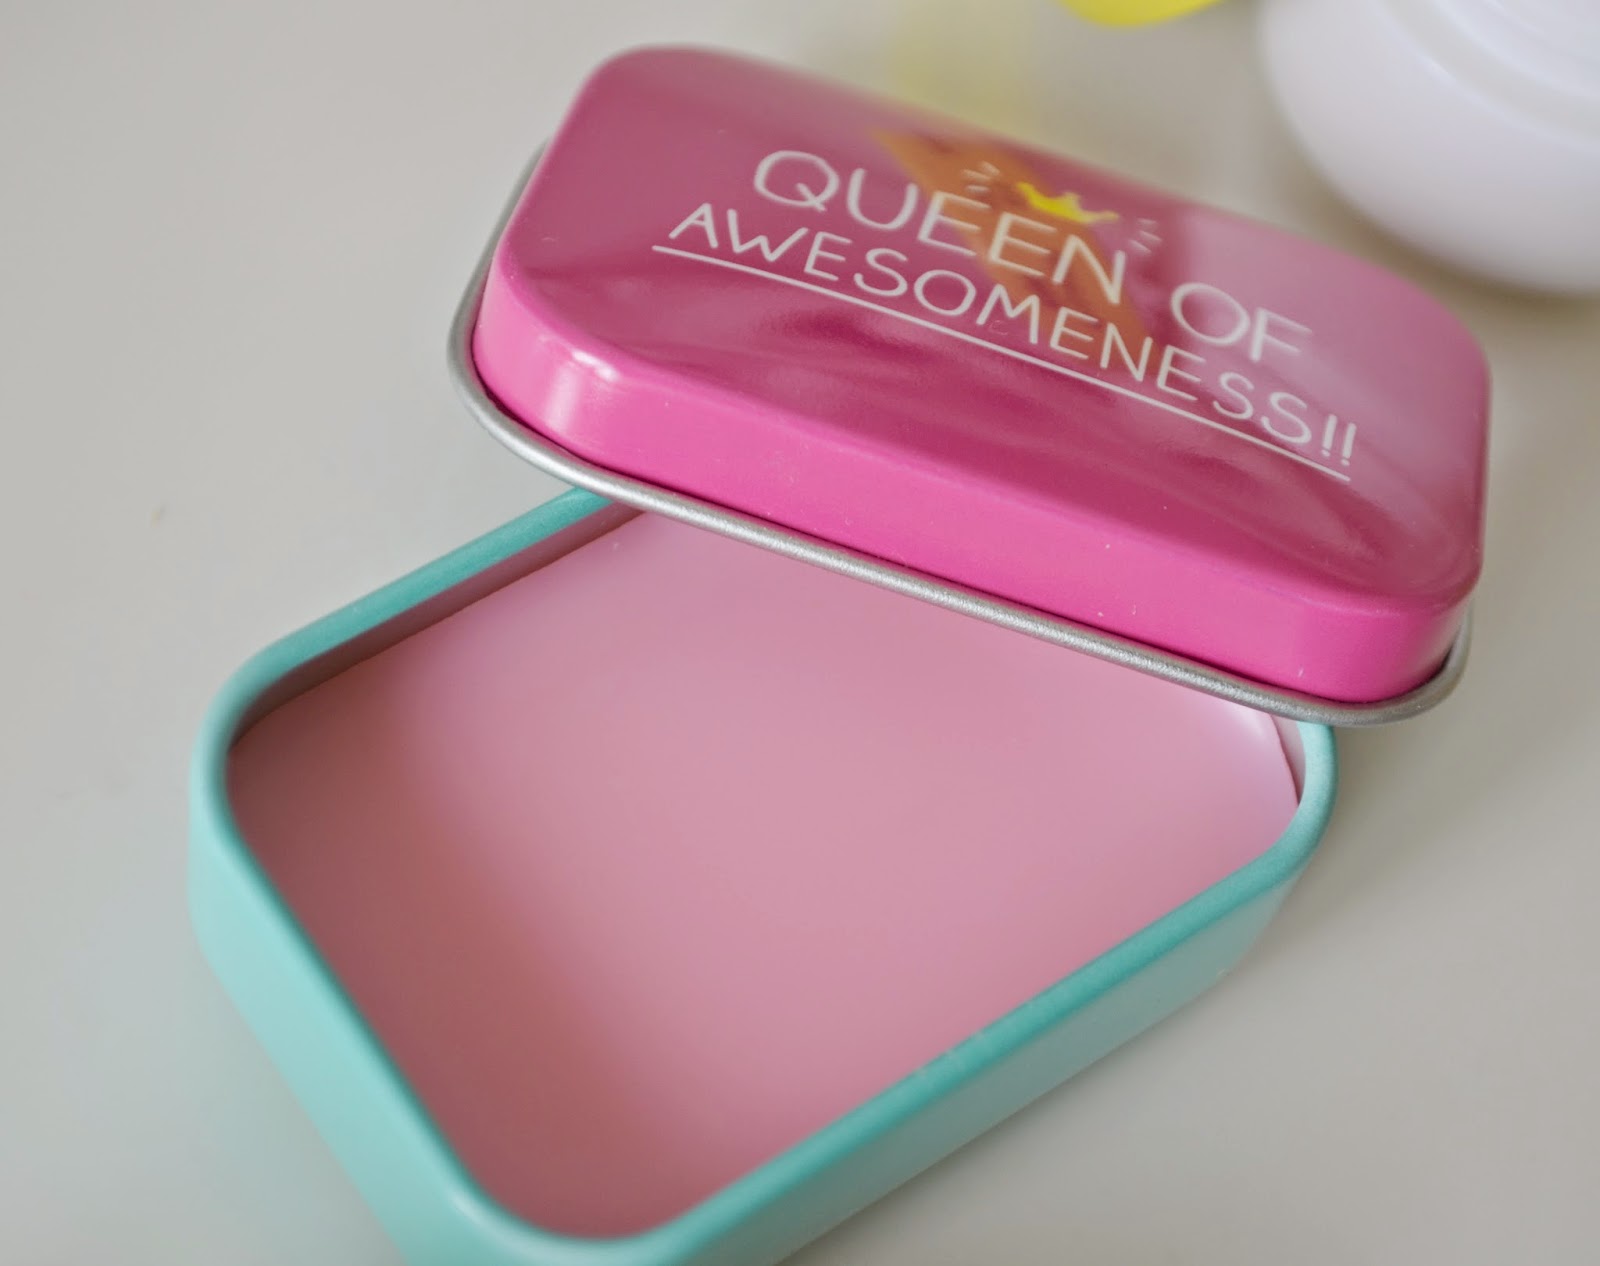 queen of awesomeness lip balm